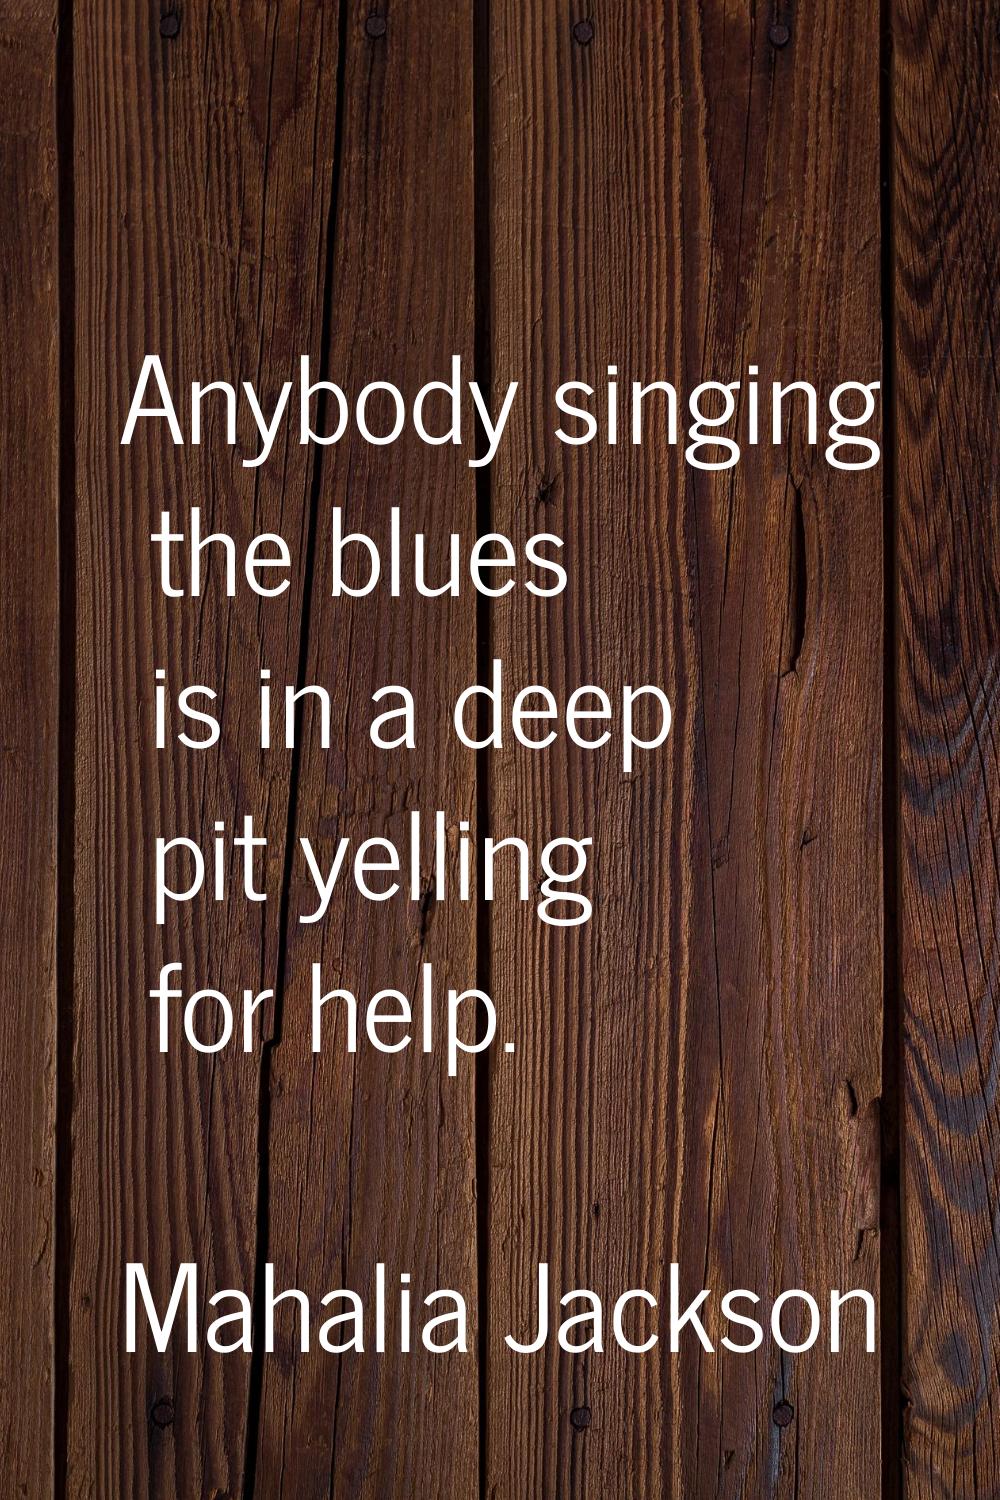 Anybody singing the blues is in a deep pit yelling for help.